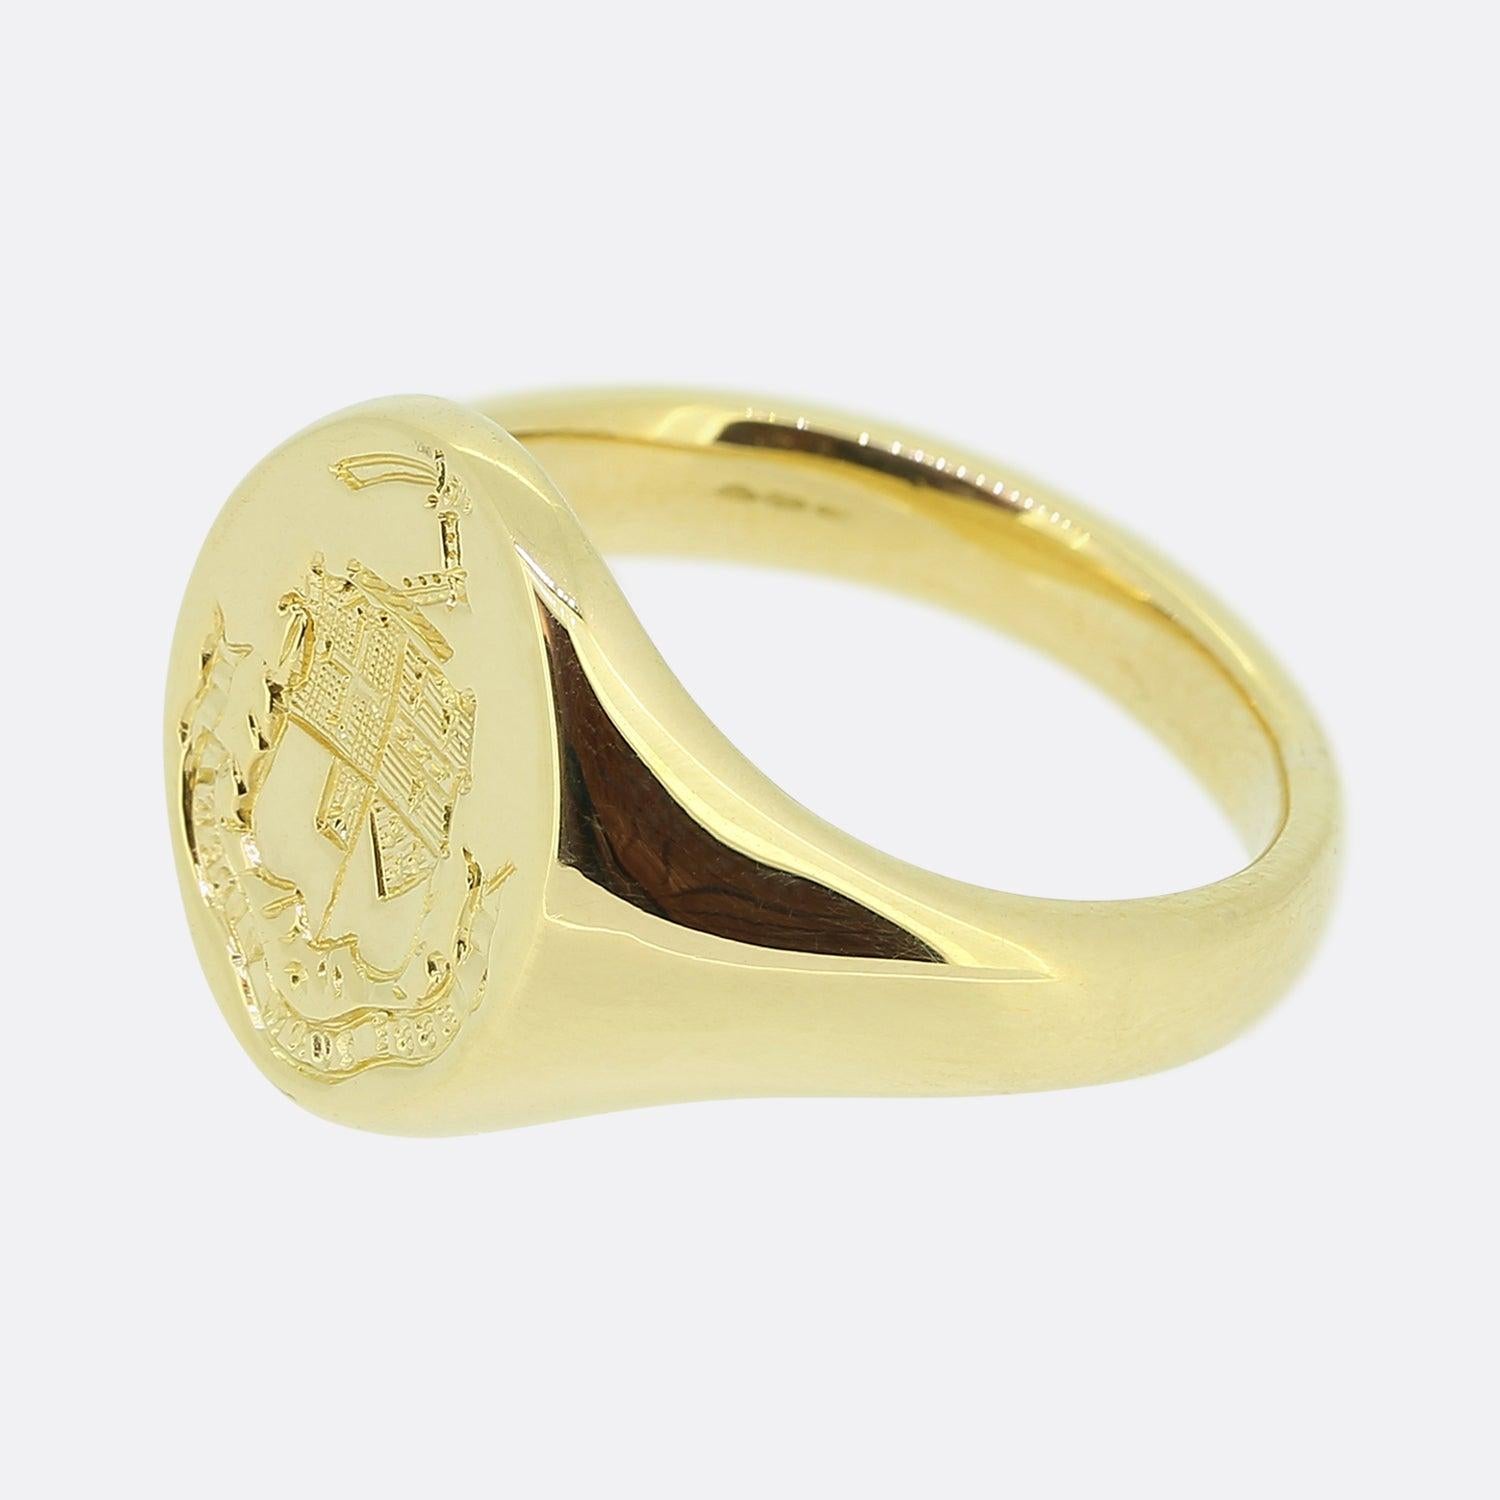 Here we have a vintage 18ct yellow gold signet ring. This oval shaped piece showcases a finely detailed deep intaglio of a coat of arms featuring a family emblem with a sword lifted aloft. The ring weighs an impressive 16.9 grams and features the